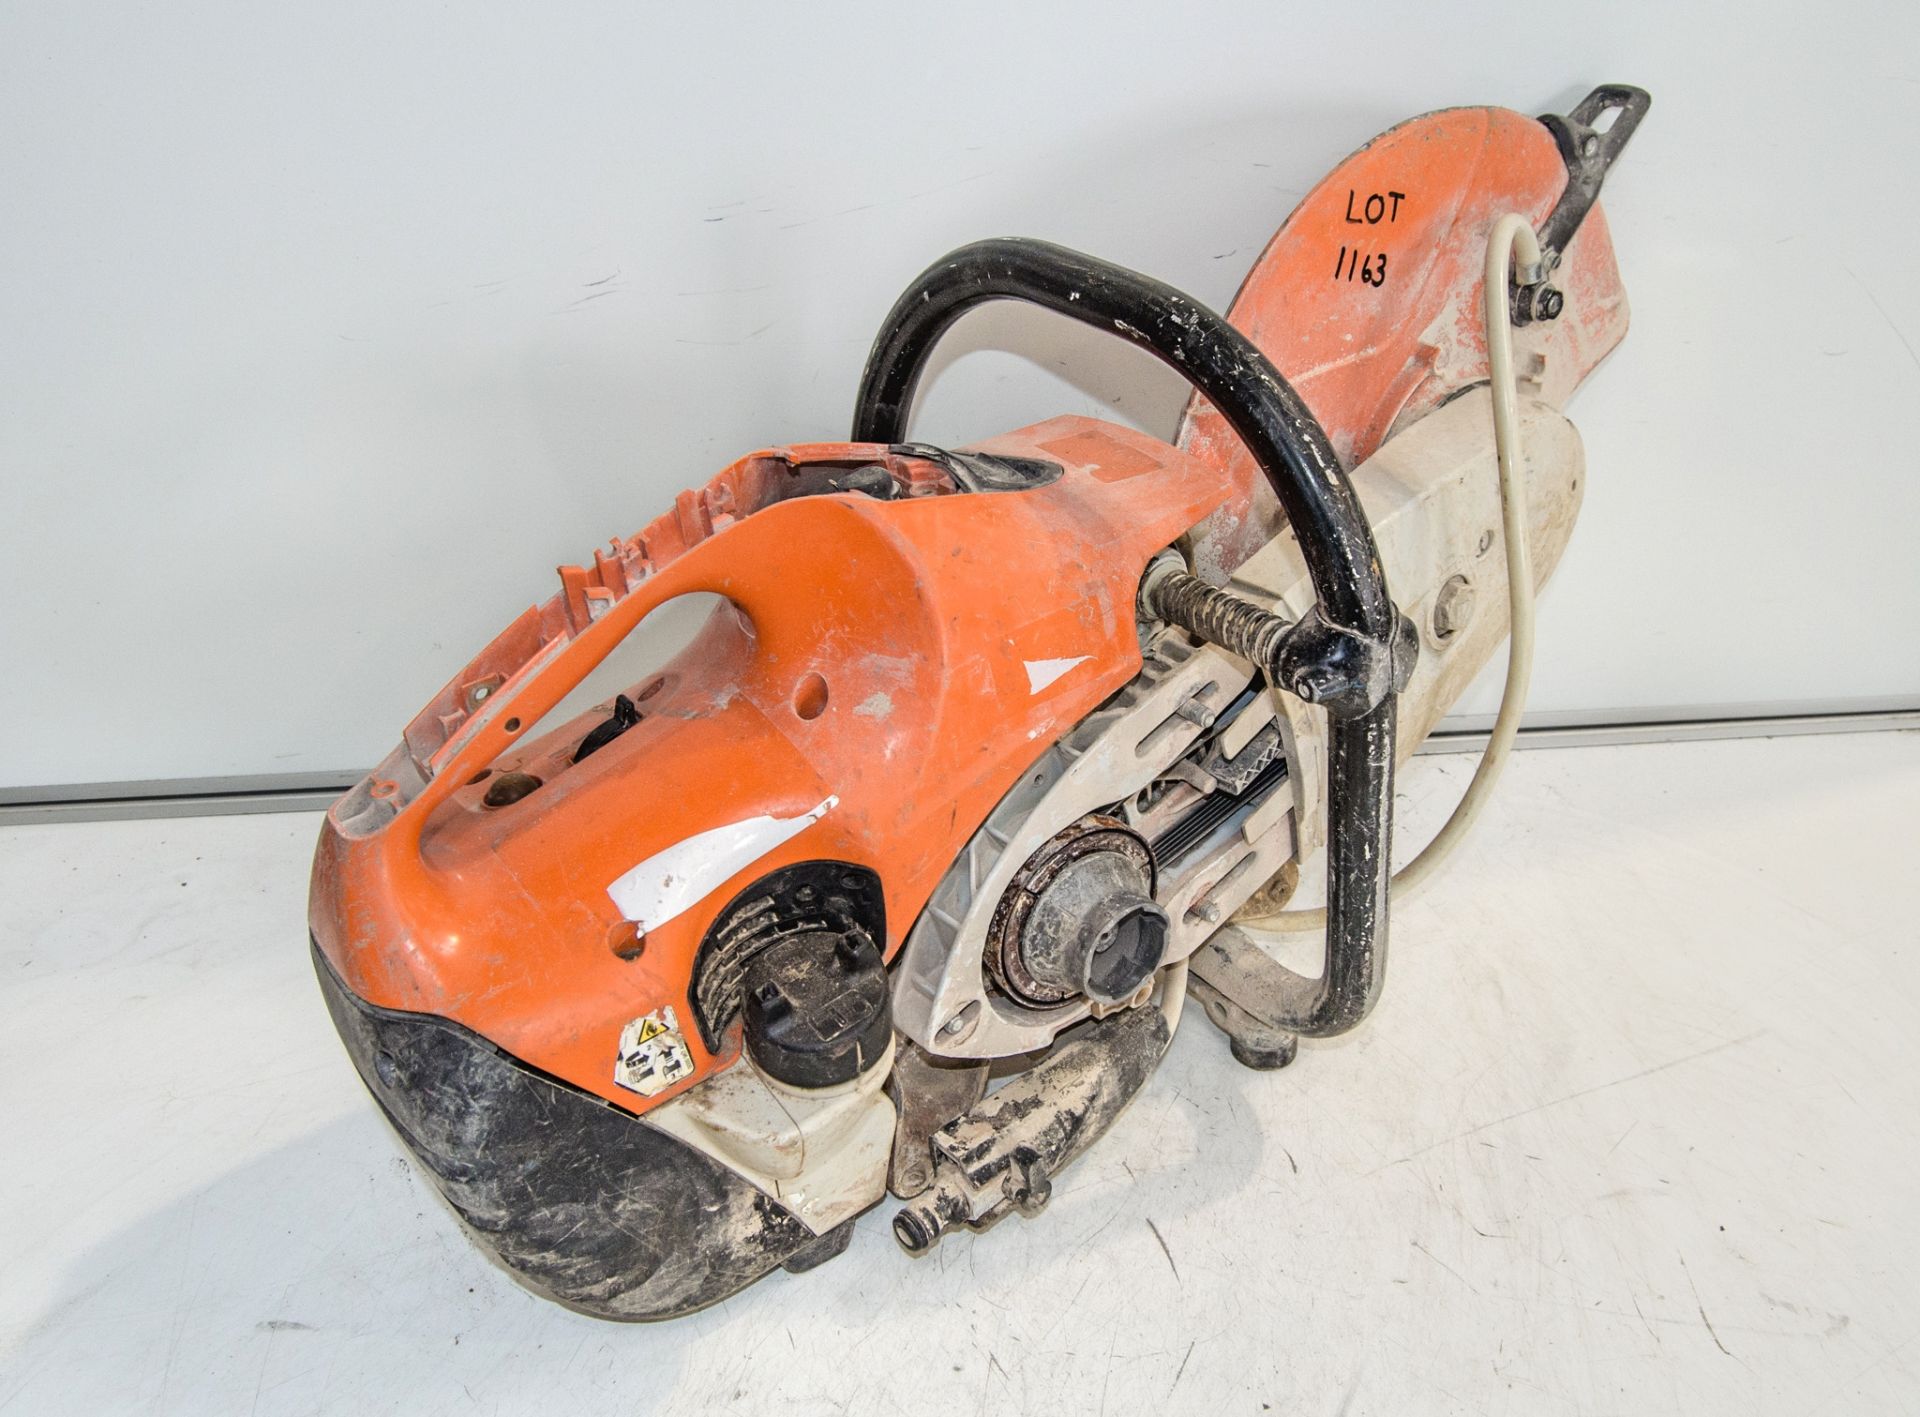 Stihl TS410 petrol driven cut off saw ** Pull cord assembly and handle parts missing ** 19025947 - Image 2 of 2